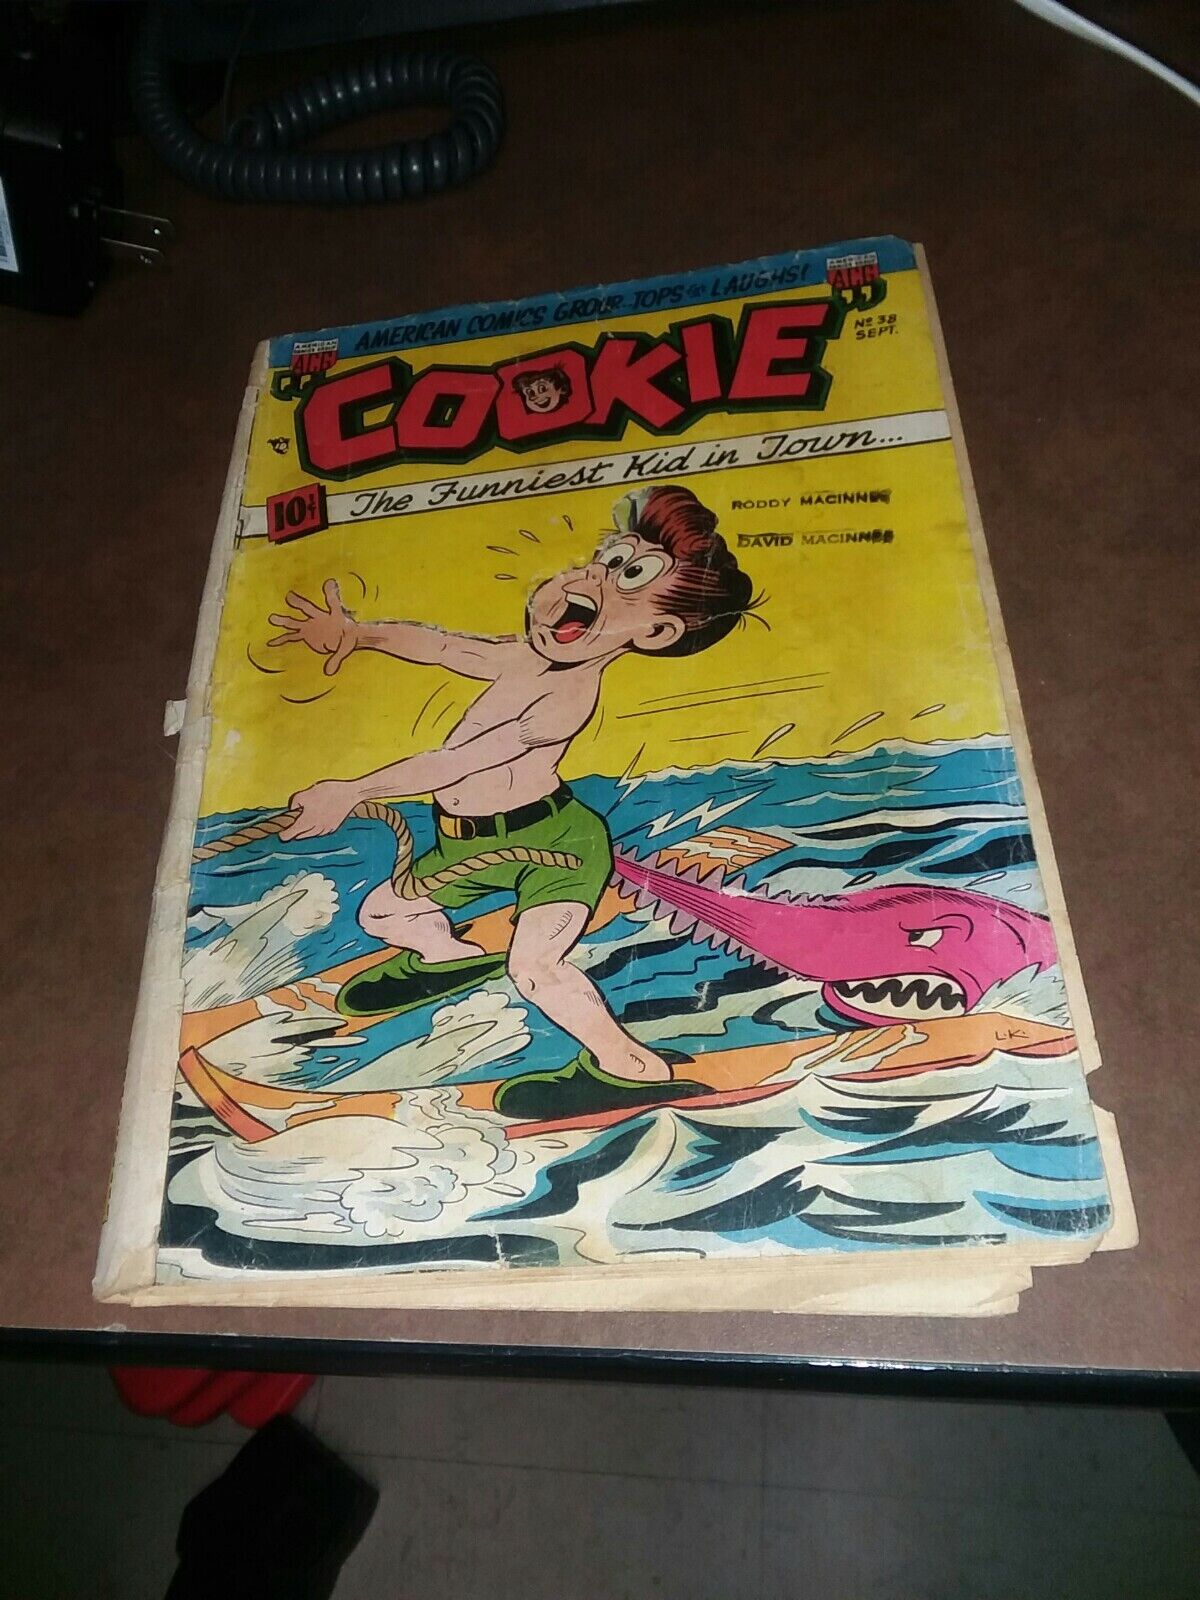 Cookie #38 american comics group 1952, golden age Dizzy Dame Starlet O'Hara, 